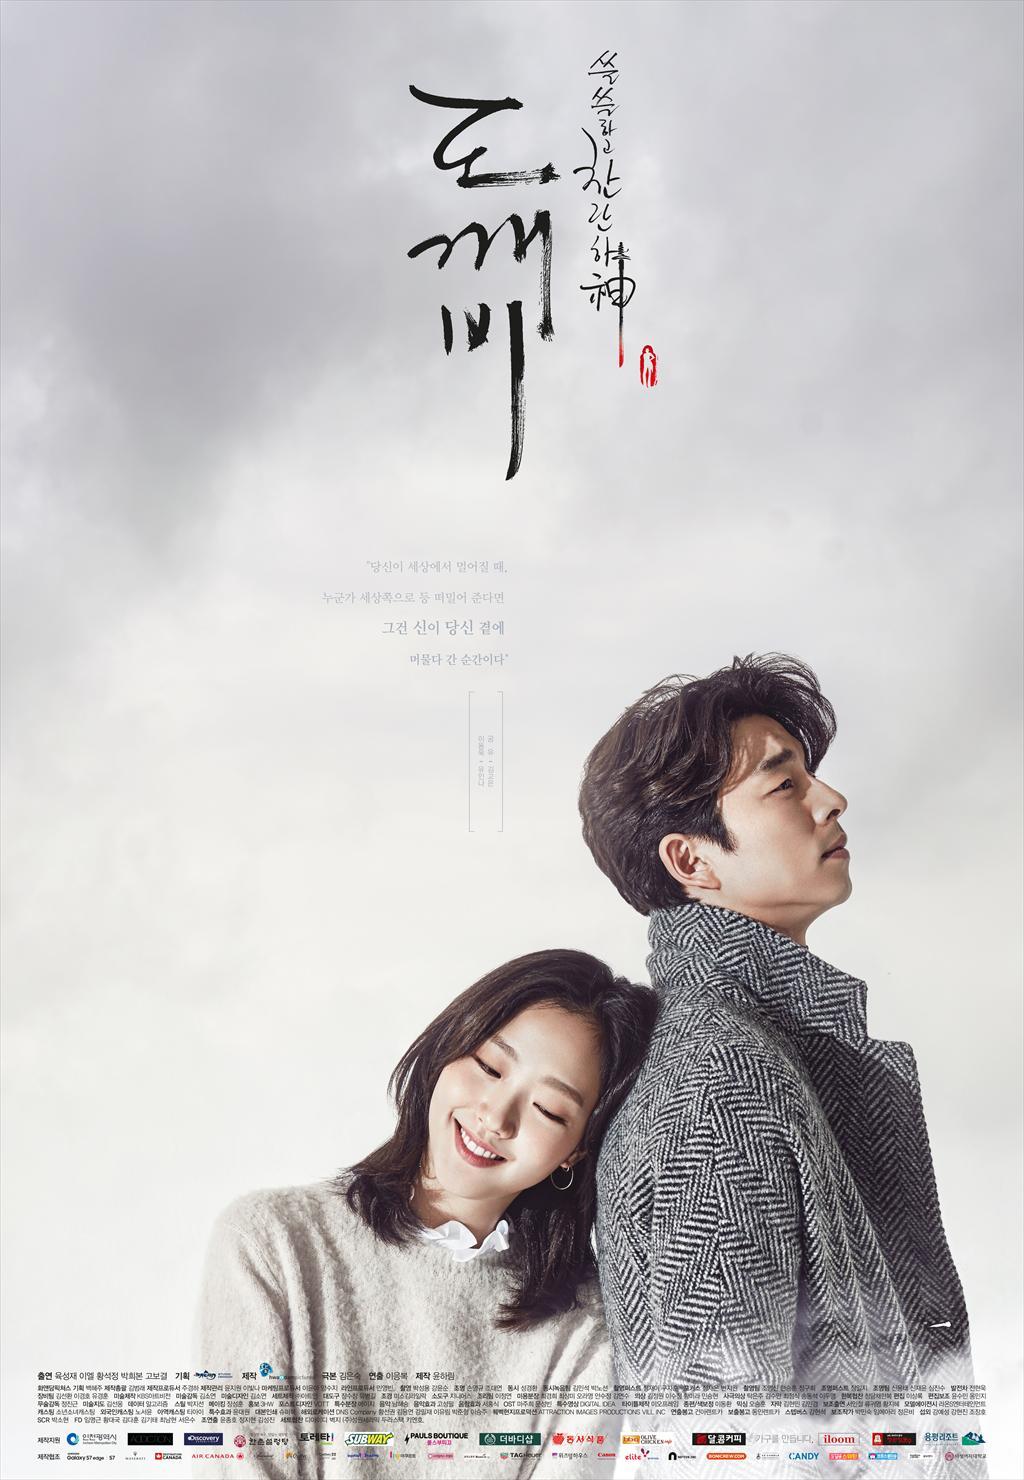 Goblin: The Lonely and Great God Season 1 (Complete) [Korean Drama]